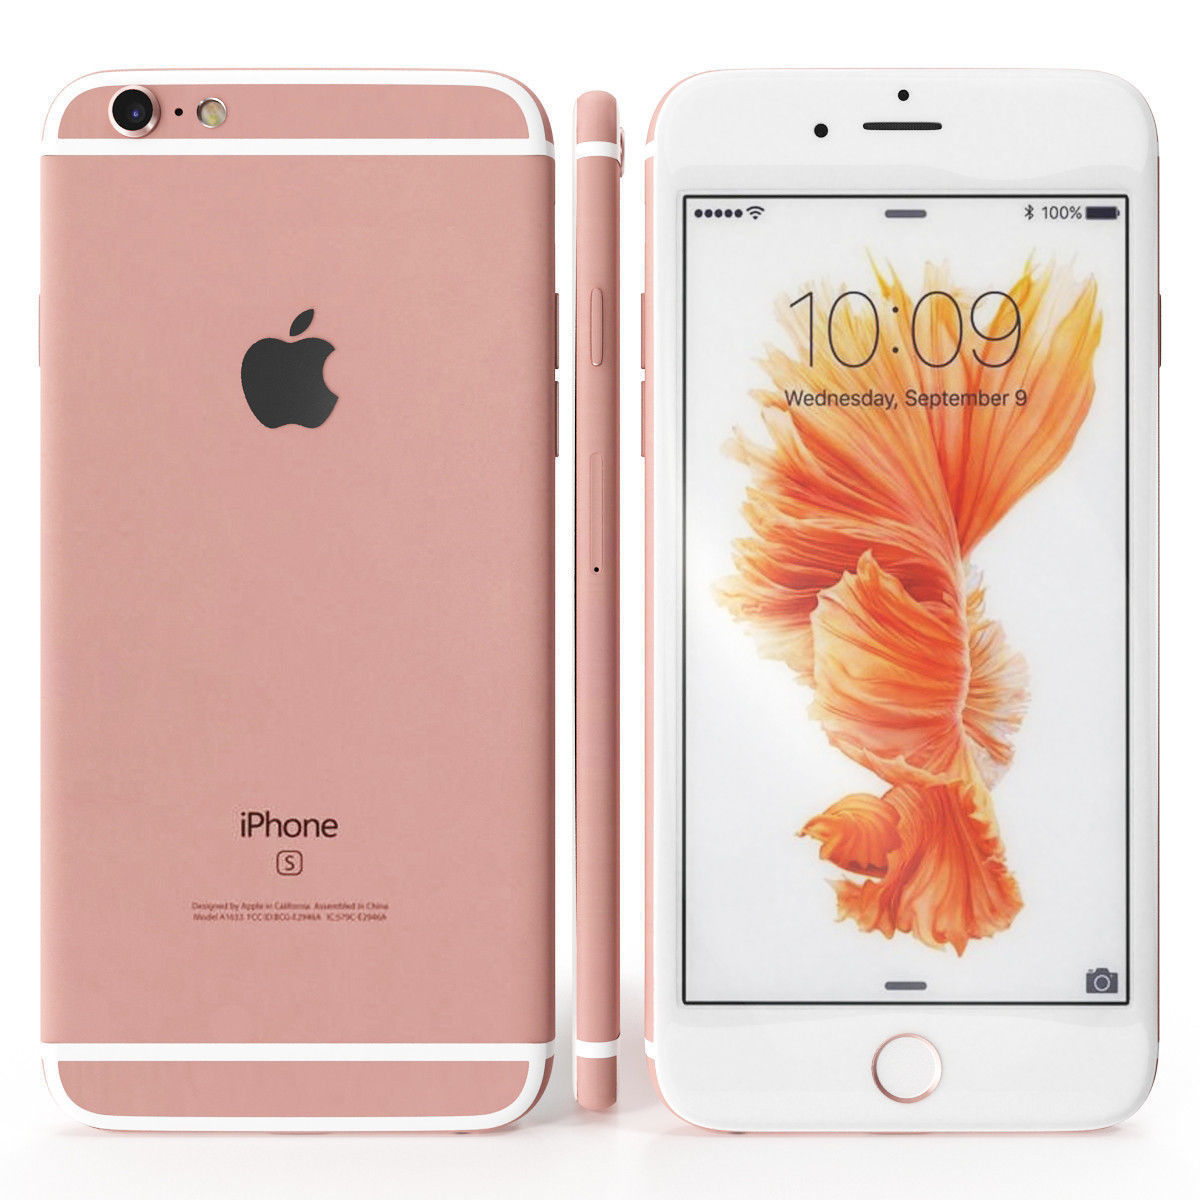 Customer Reviews: Apple iPhone 6s Plus 16GB Rose Gold (AT&T) MKTP2LL/A - Best Buy